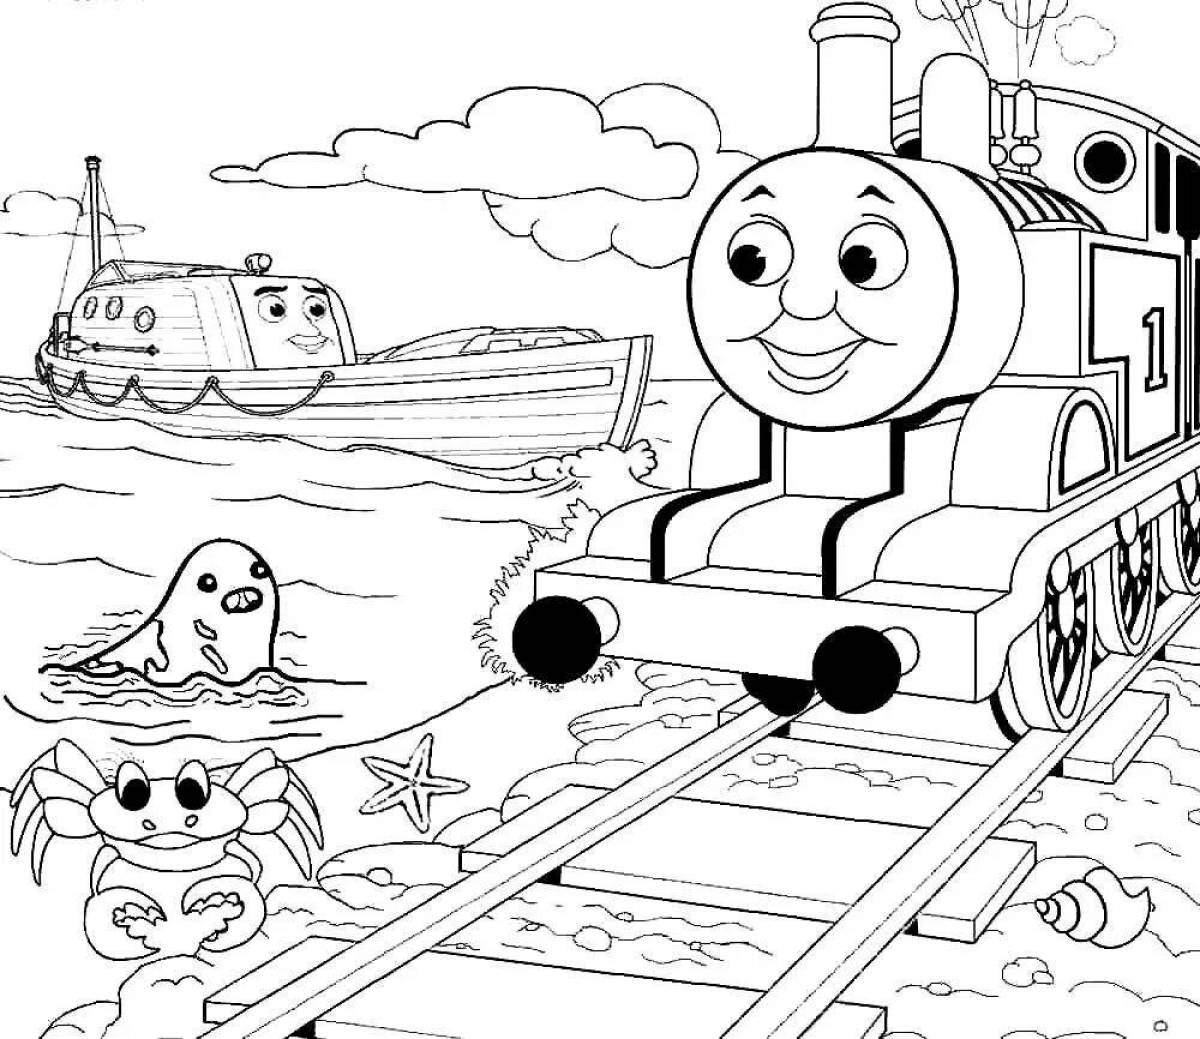 Amazing cartoon coloring book for 5-6 year old boys